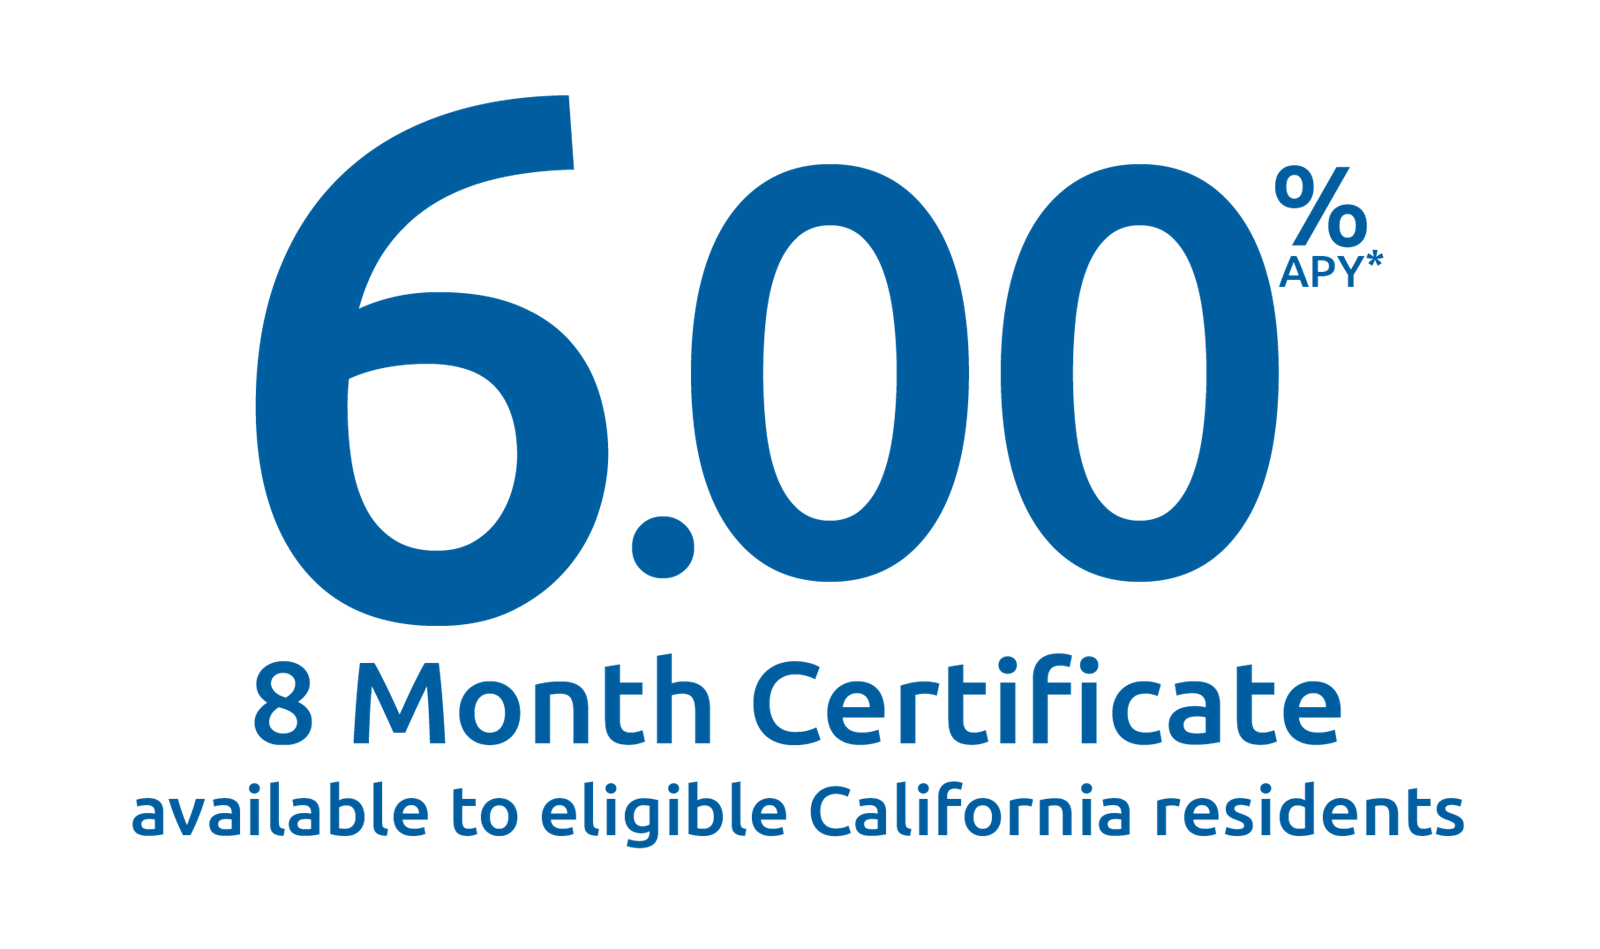 6.00 APY* - 8 month certificate available to eligible California residents